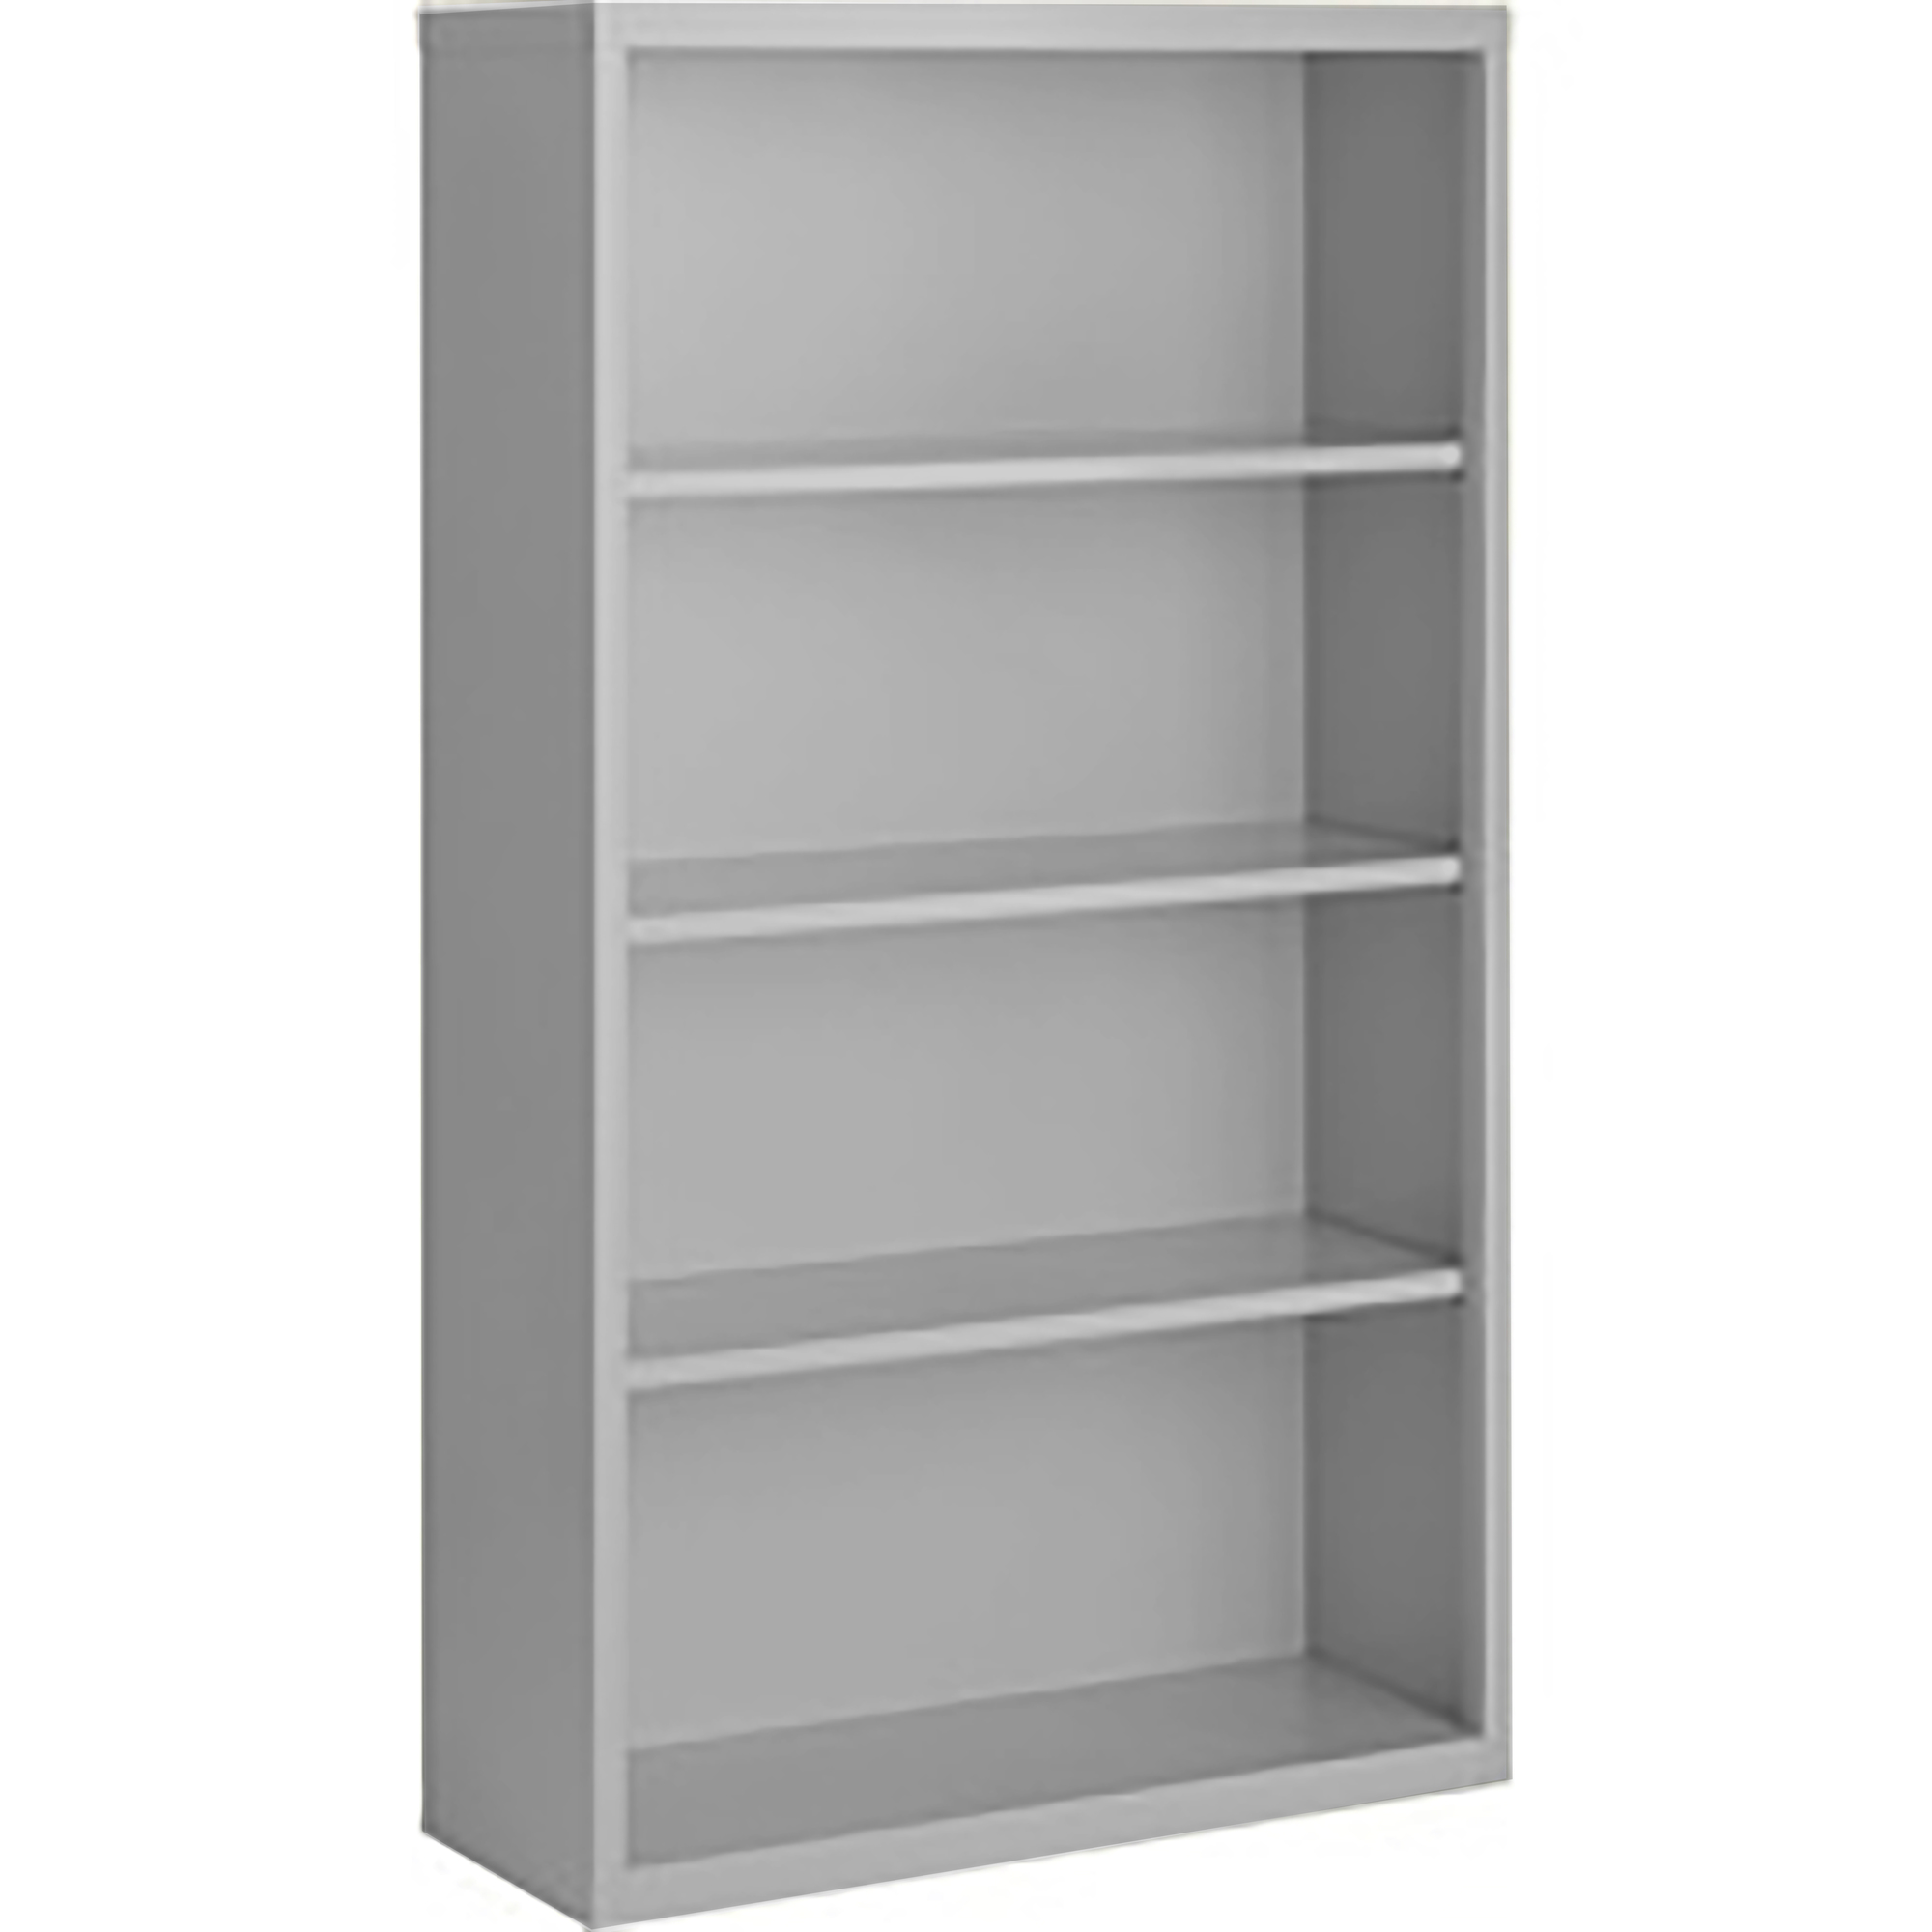 Steel Cabinets USA, 36Inchx13Inchx60Inch Gray Bookcase Steel Fully Assembled, Height 60 in, Shelves (qty.) 4, Material Steel, Model BCA-366013-G